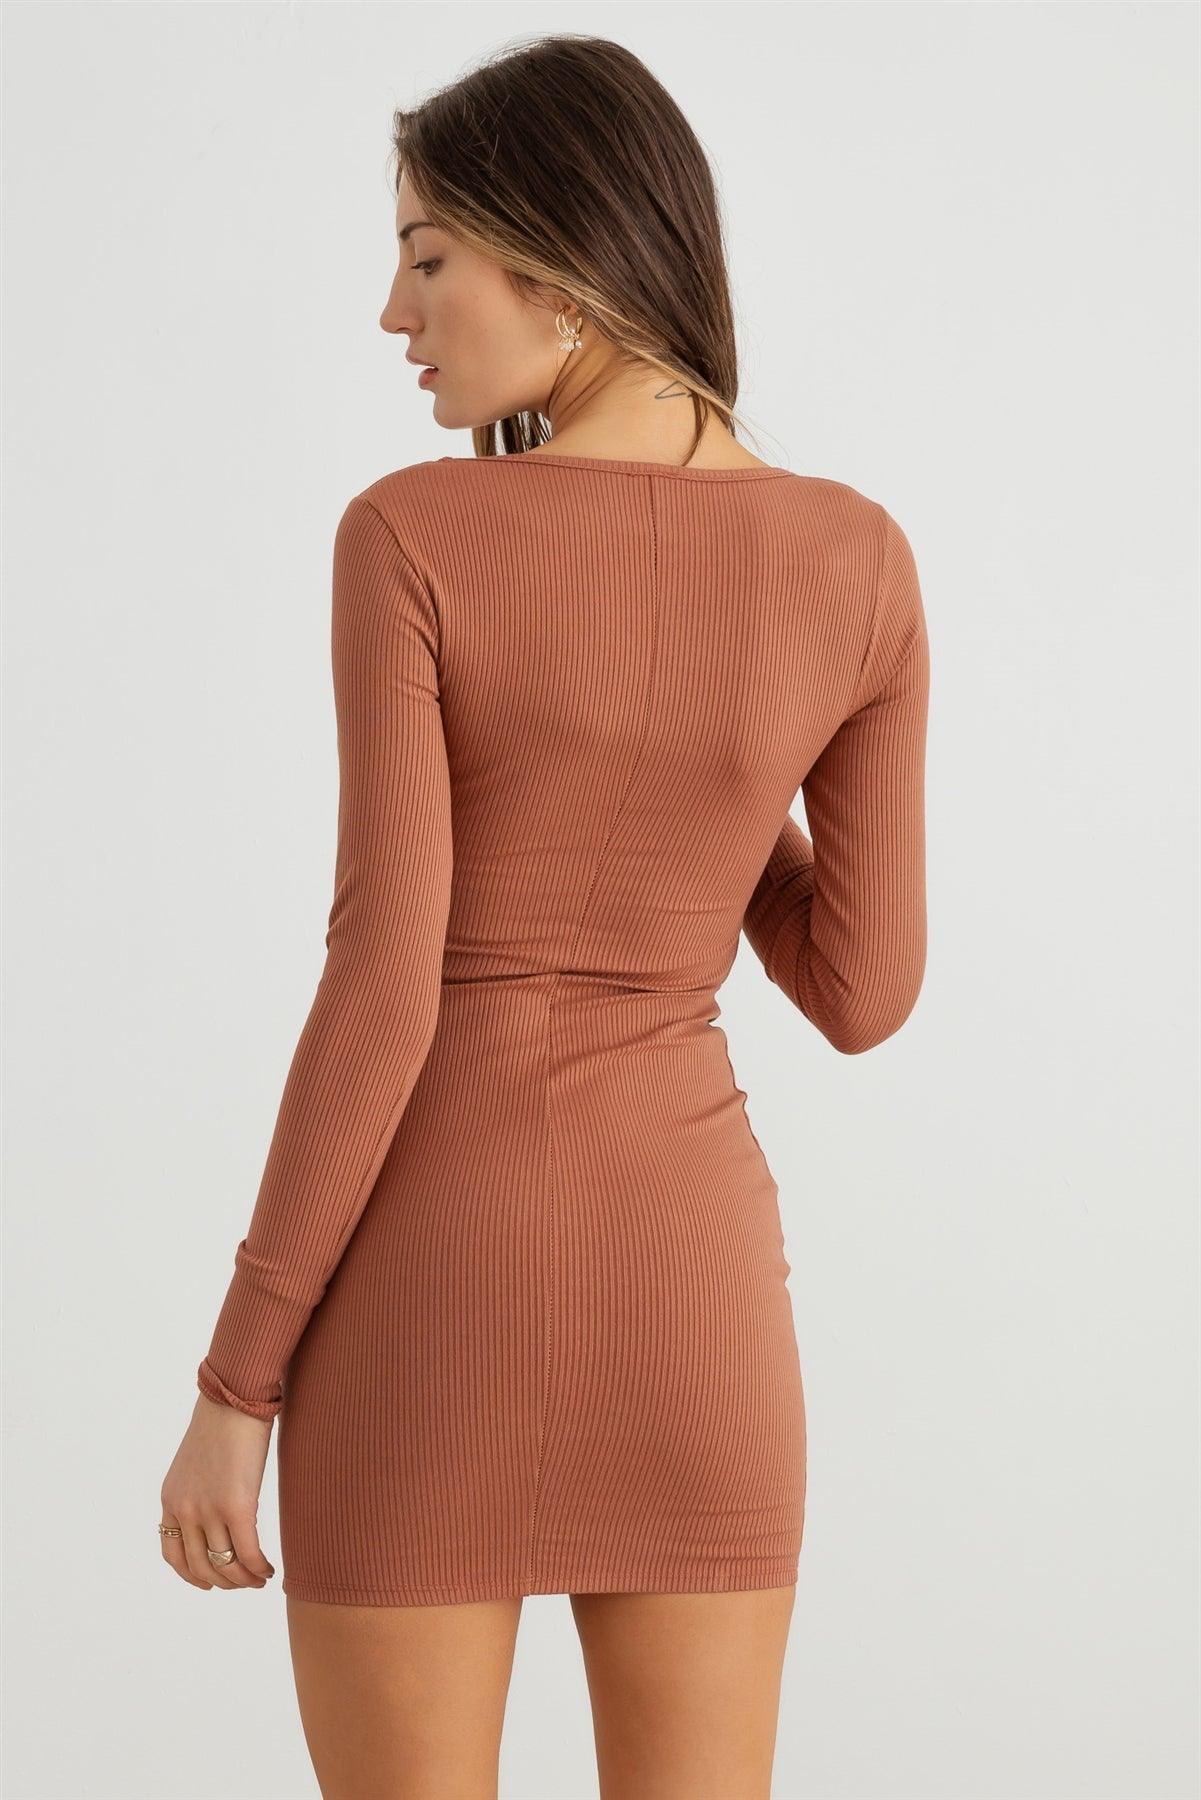 Mocha Ribbed Square Neck Cut-Out Front Open Back Mini Dress /2-2-2